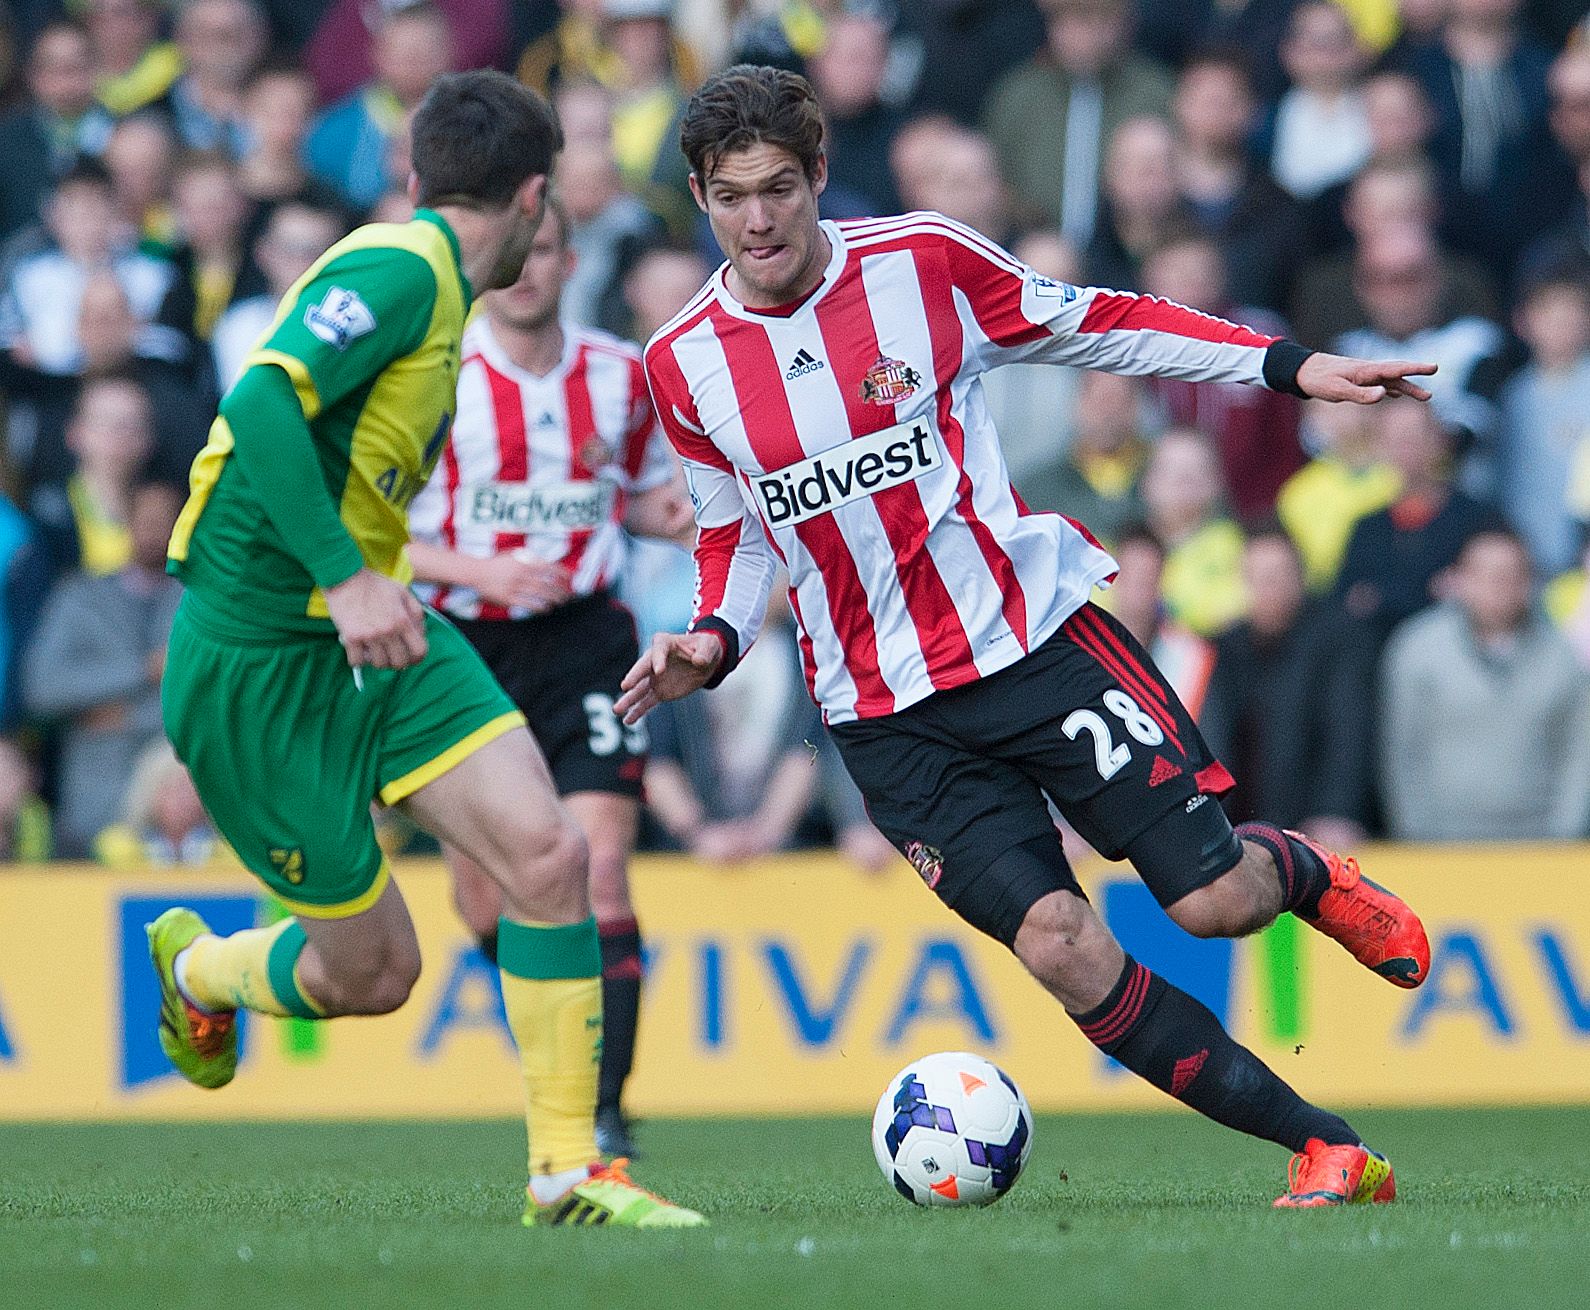 Football - Norwich City v Sunderland - Barclays Premier League - Carrow Road - 22/3/14 
Sunderland's Marcos Alonso in action 
Mandatory Credit: Action Images / Alan Walter 
Livepic 
EDITORIAL USE ONLY. No use with unauthorized audio, video, data, fixture lists, club/league logos or 